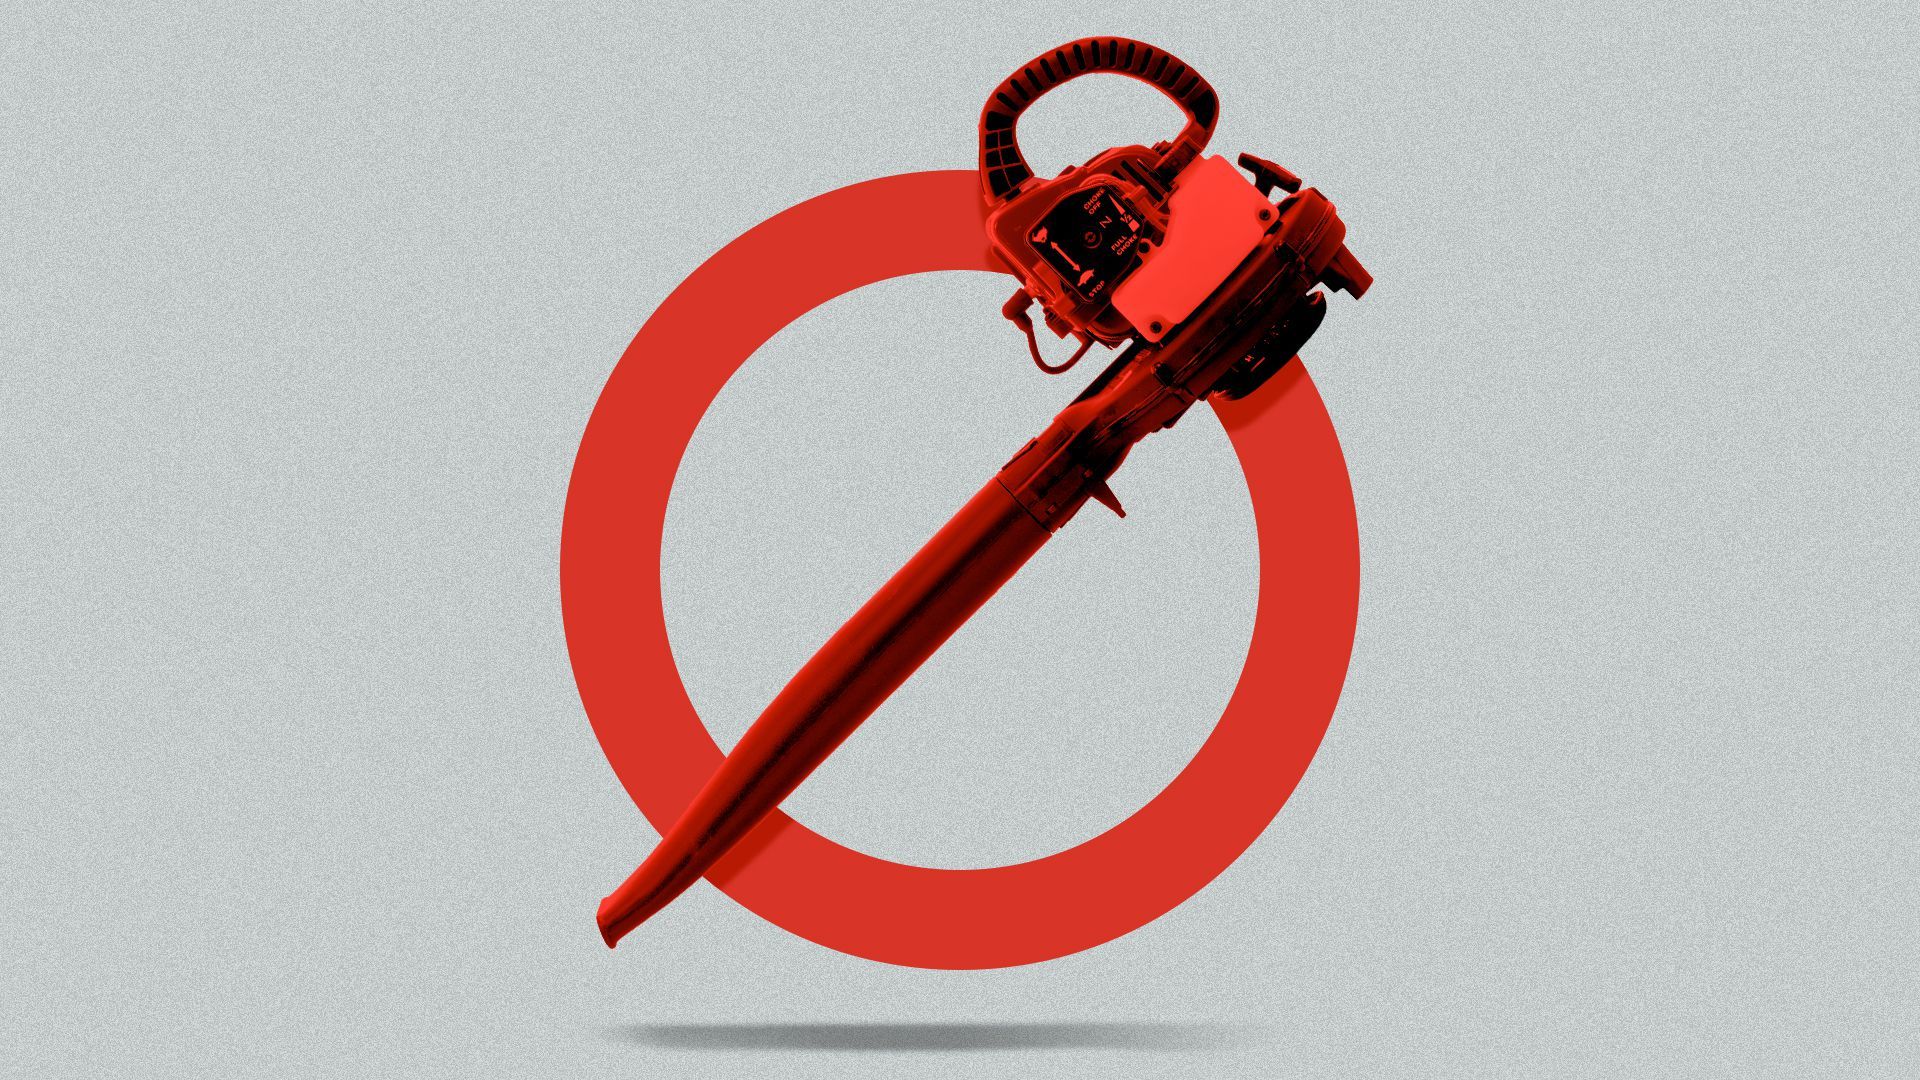 Illustration of a no symbol with a leaf blower for a crossbar.